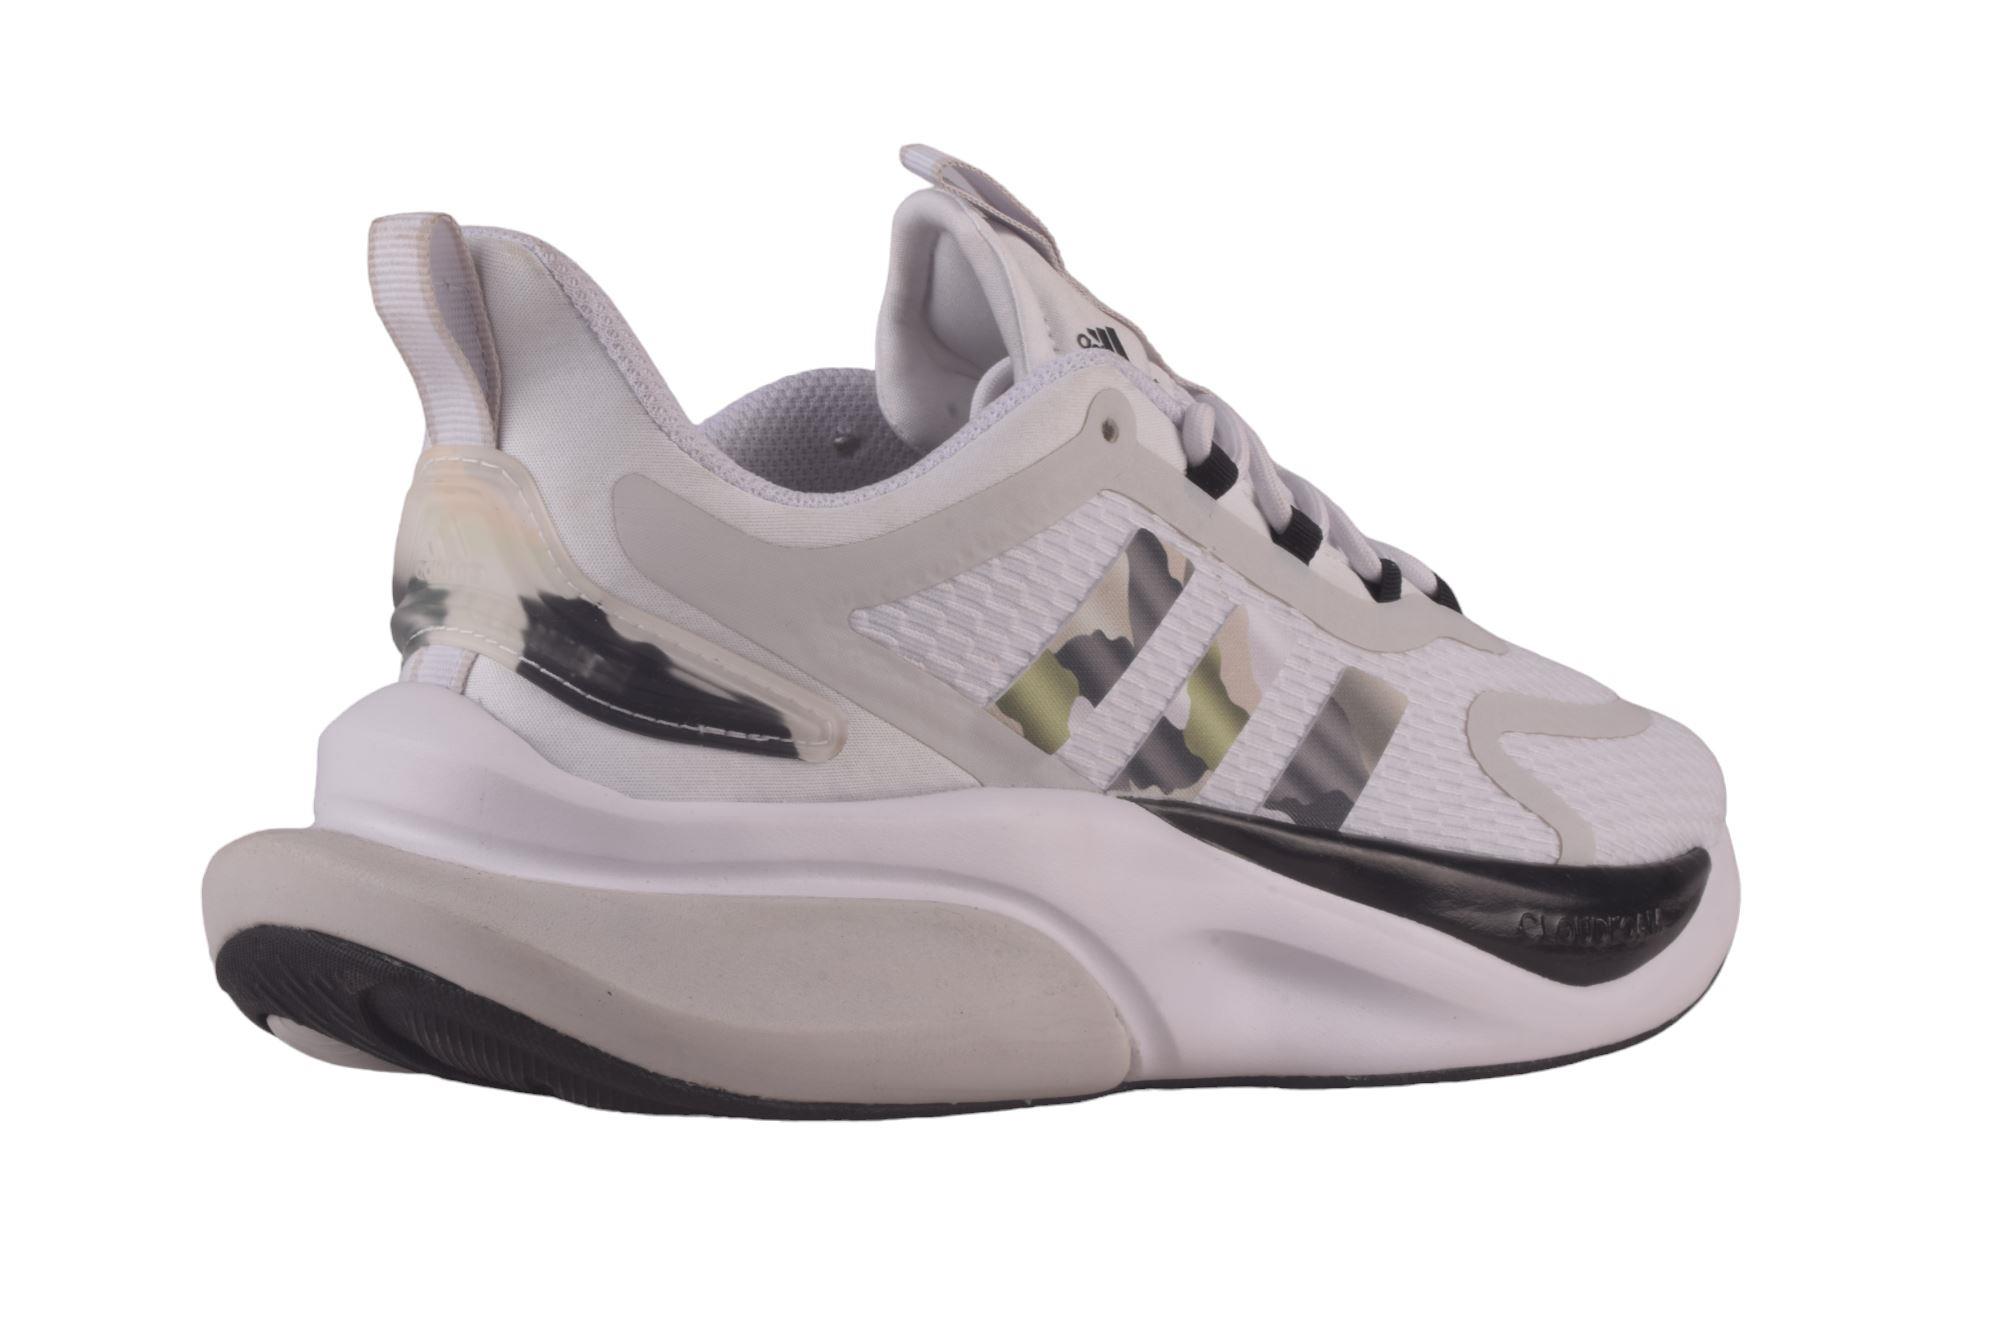 Adidas FTWR WHITE/CORE BLACK/GREY ONE SNEAKERS ::PARMAR BOOT HOUSE